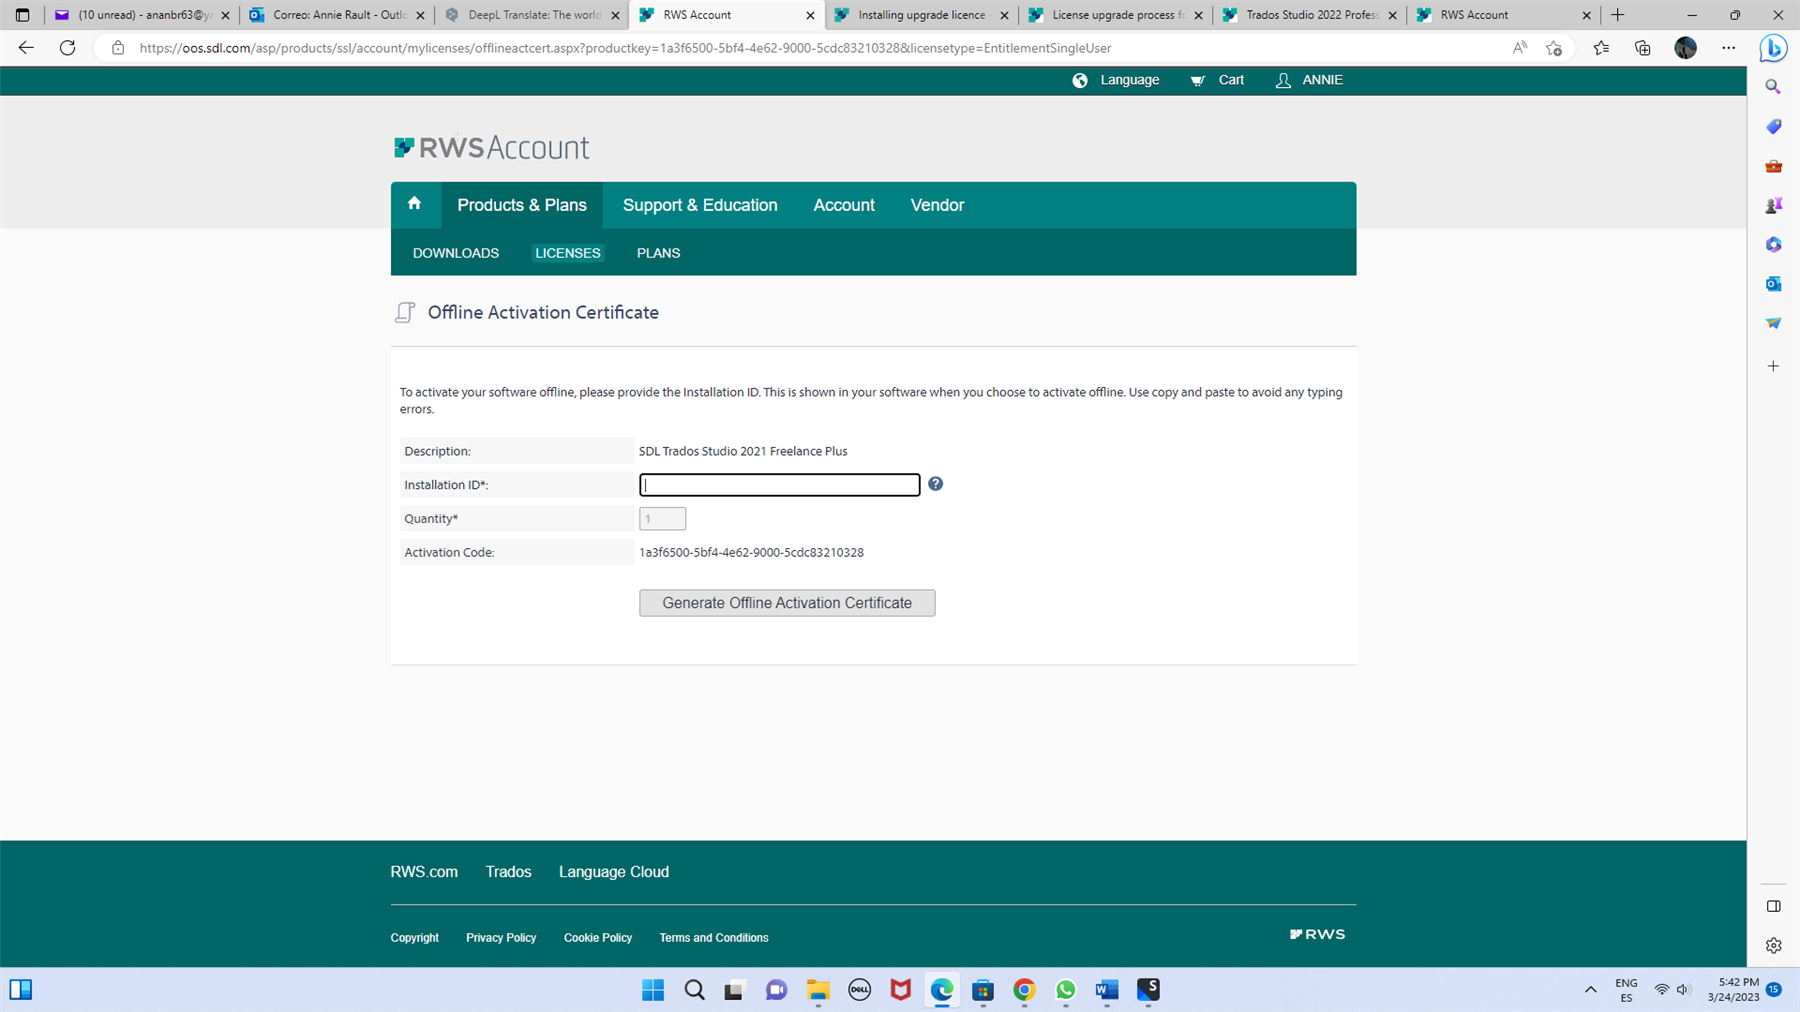 RWS Account page for Offline Activation Certificate with fields for Description, Installation ID, Quantity, and Activation Code. Description reads 'SDL Trados Studio 2021 Freelance Plus'. Activation Code is filled with a string of characters.